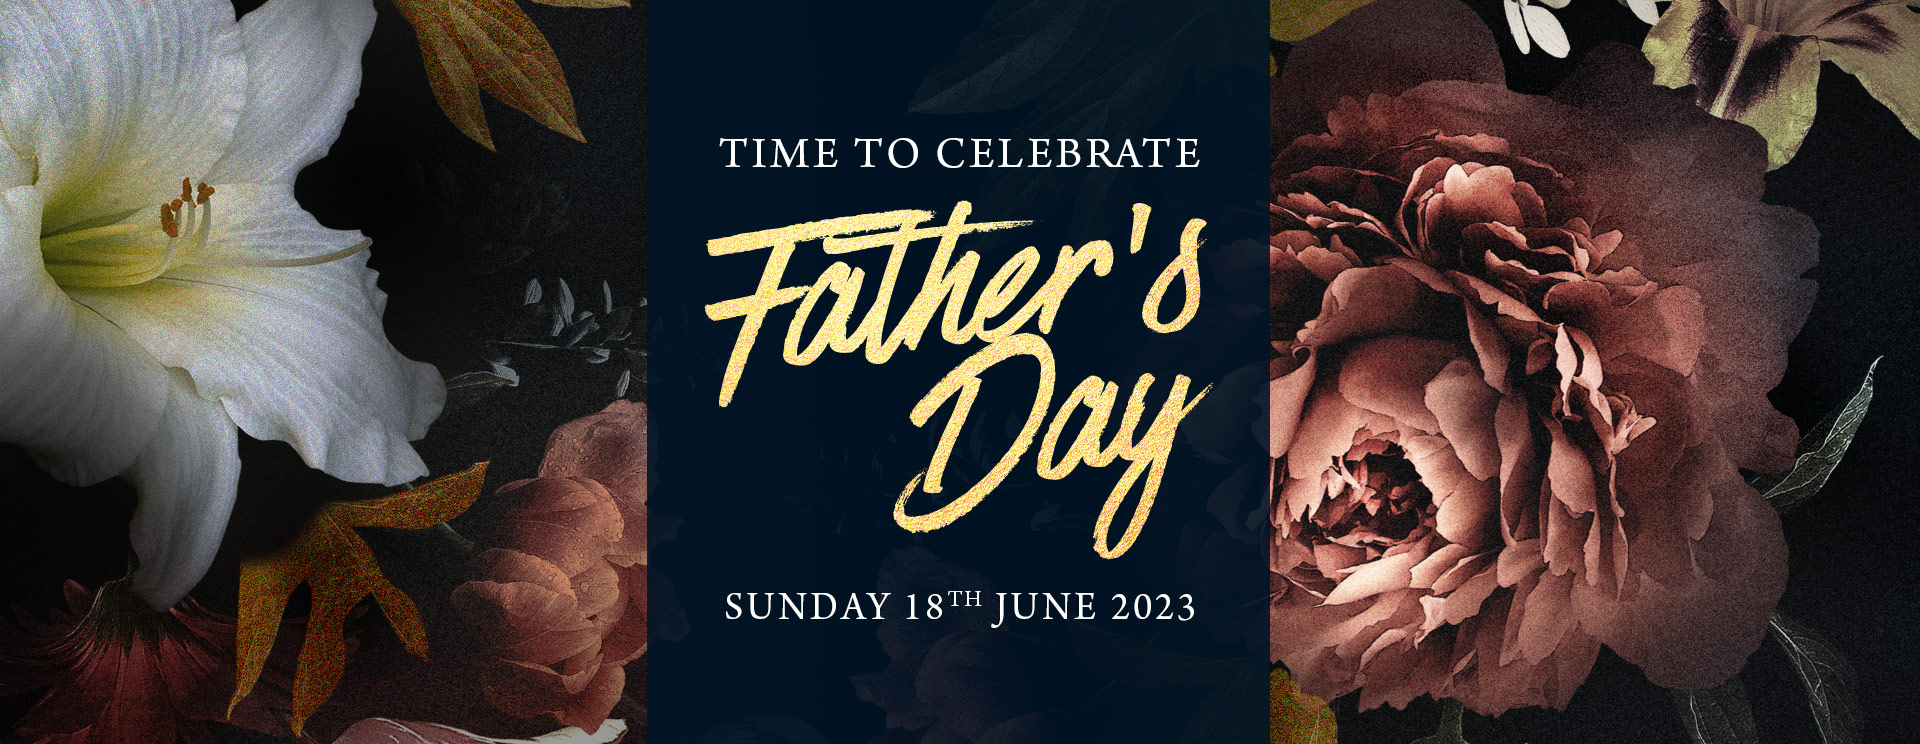 Fathers Day at The Bell Inn